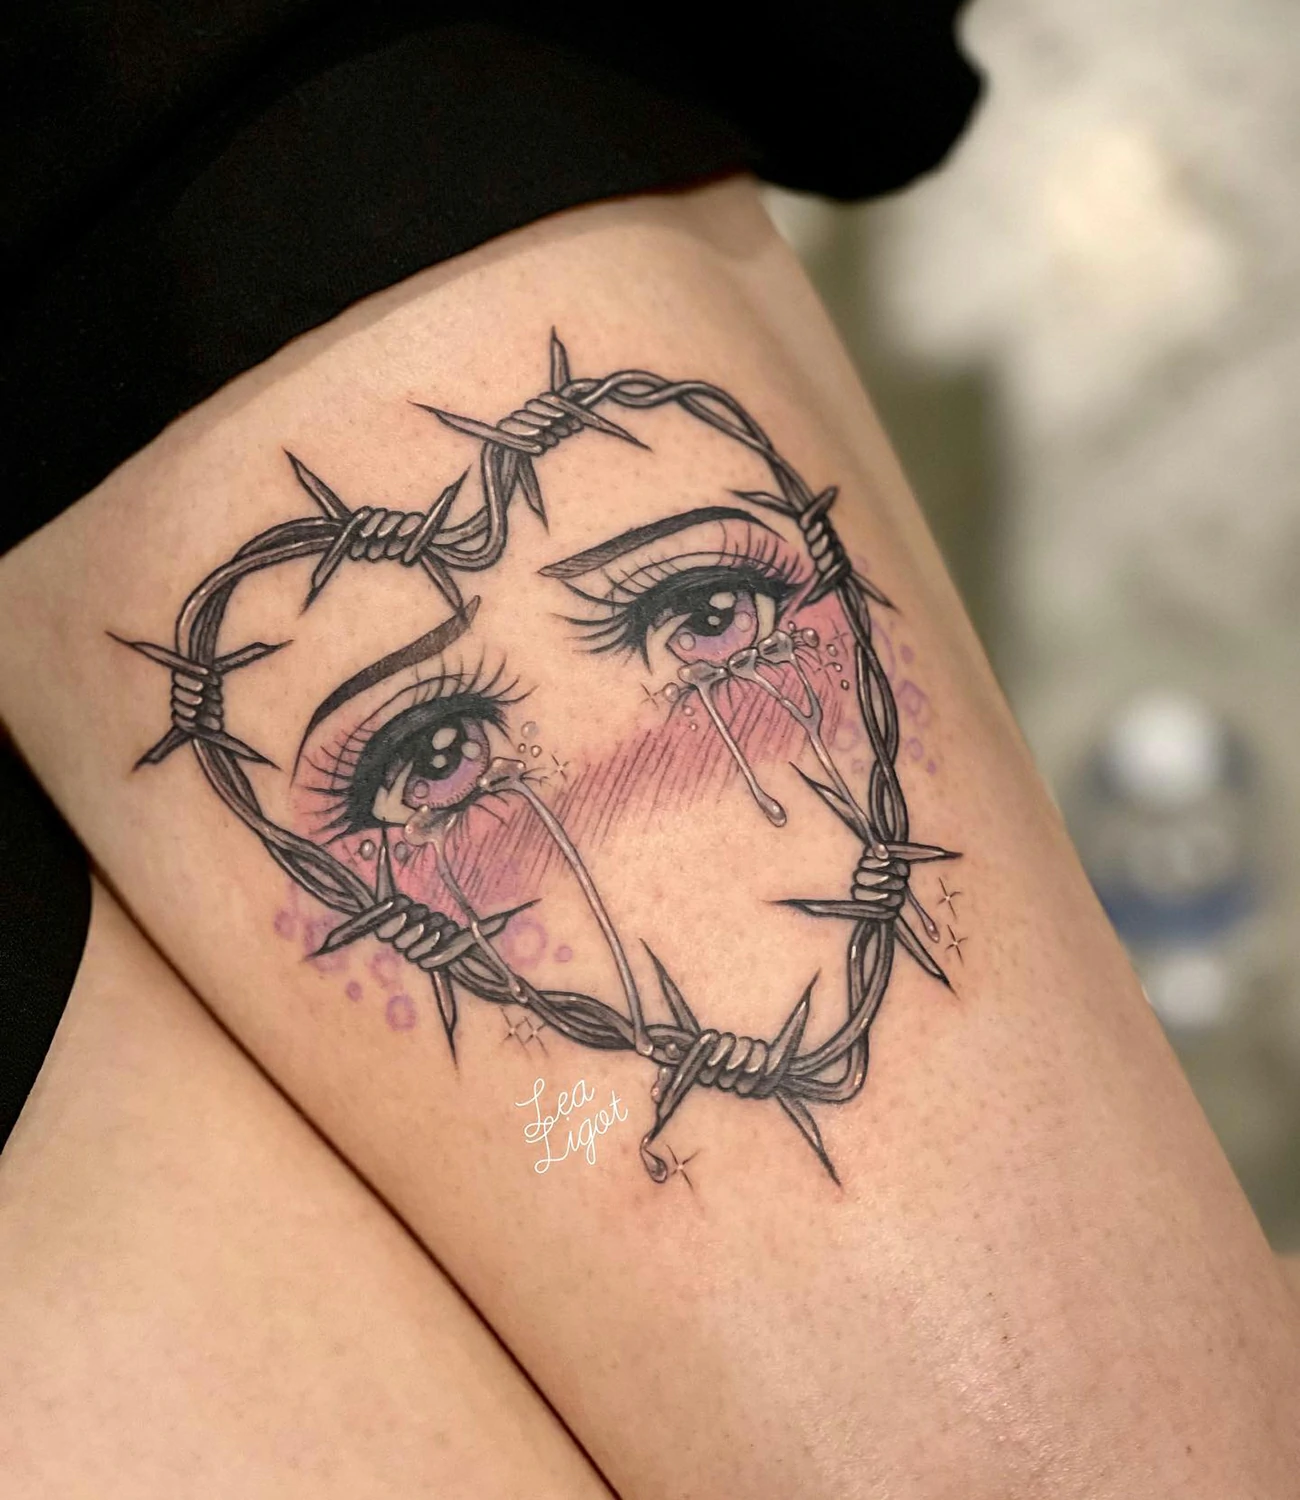 Barbed Wire Heart Tattoo